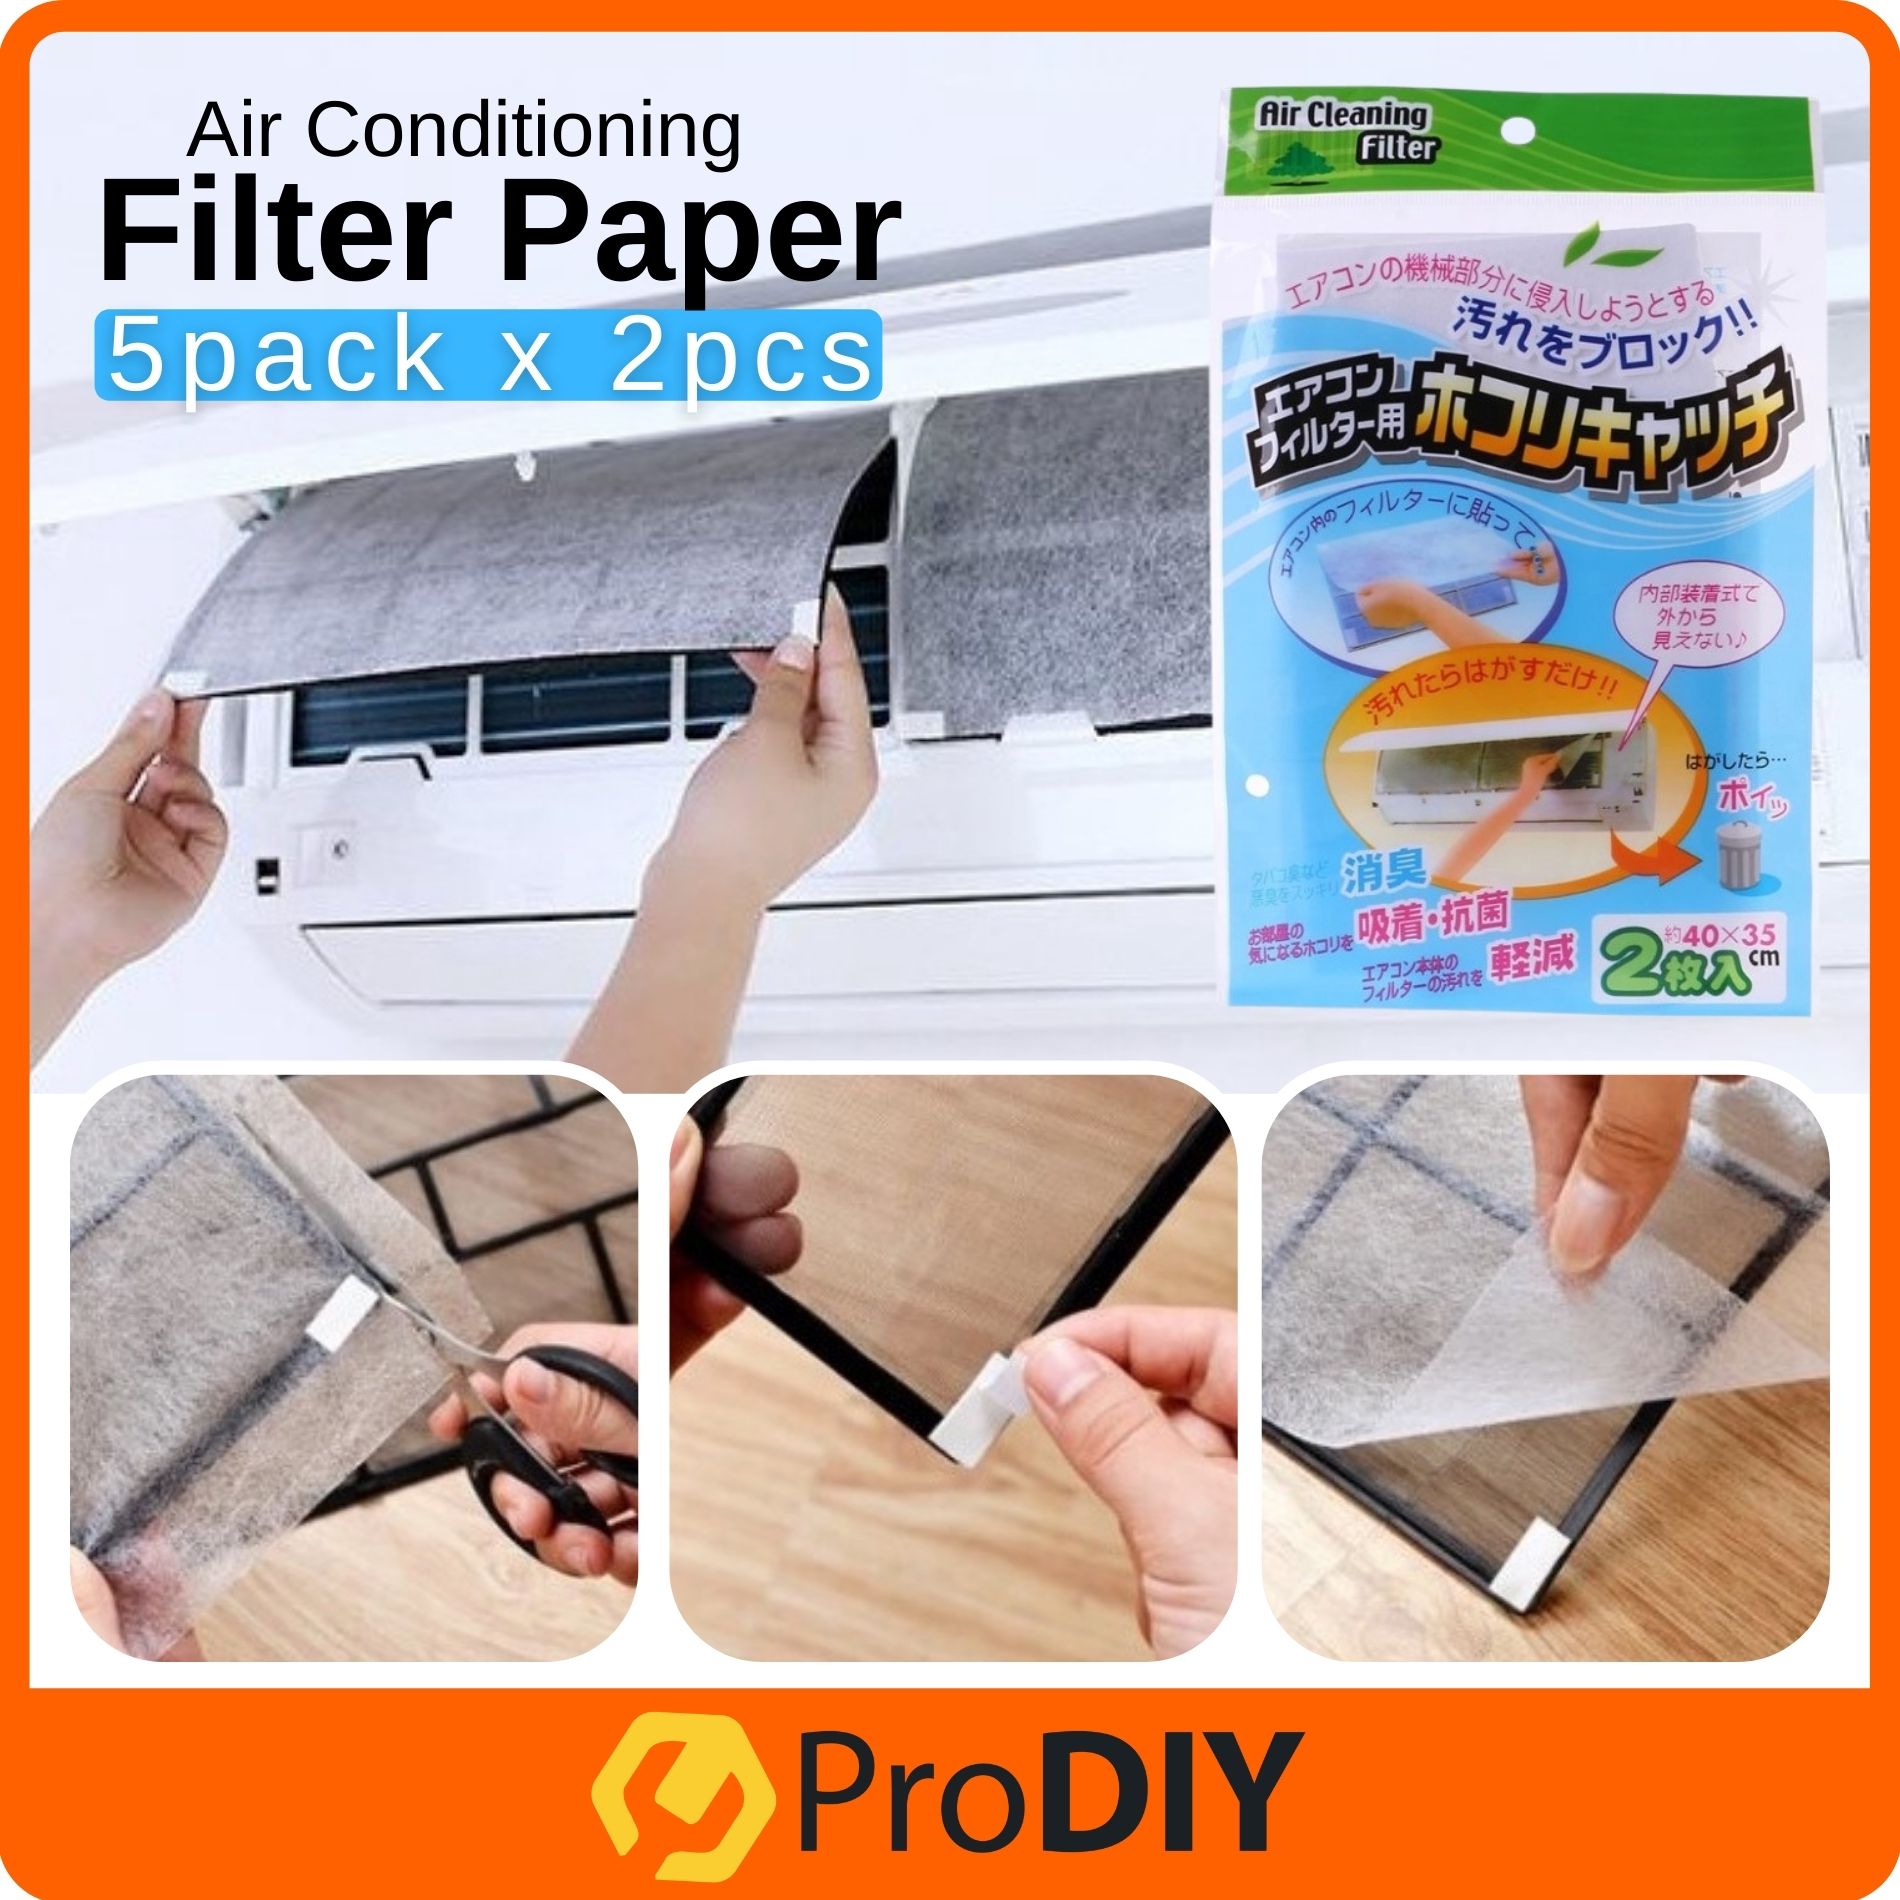 5 Pack x 2pcs Air Conditioning Filter Paper Air Filter Sheet Dustproof Dust Control Air Cleaning Filter